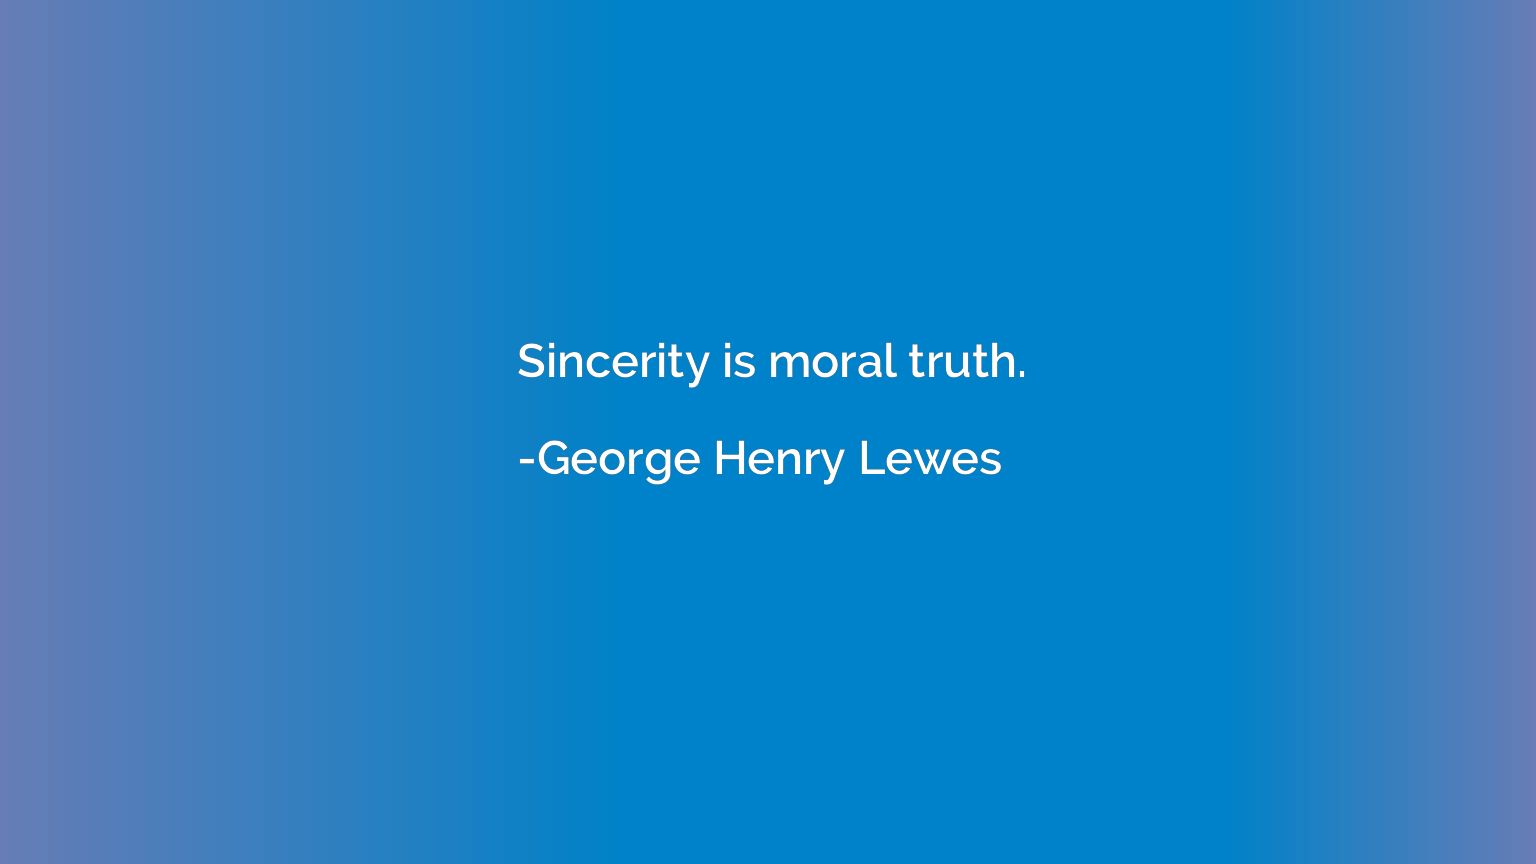 Sincerity is moral truth.